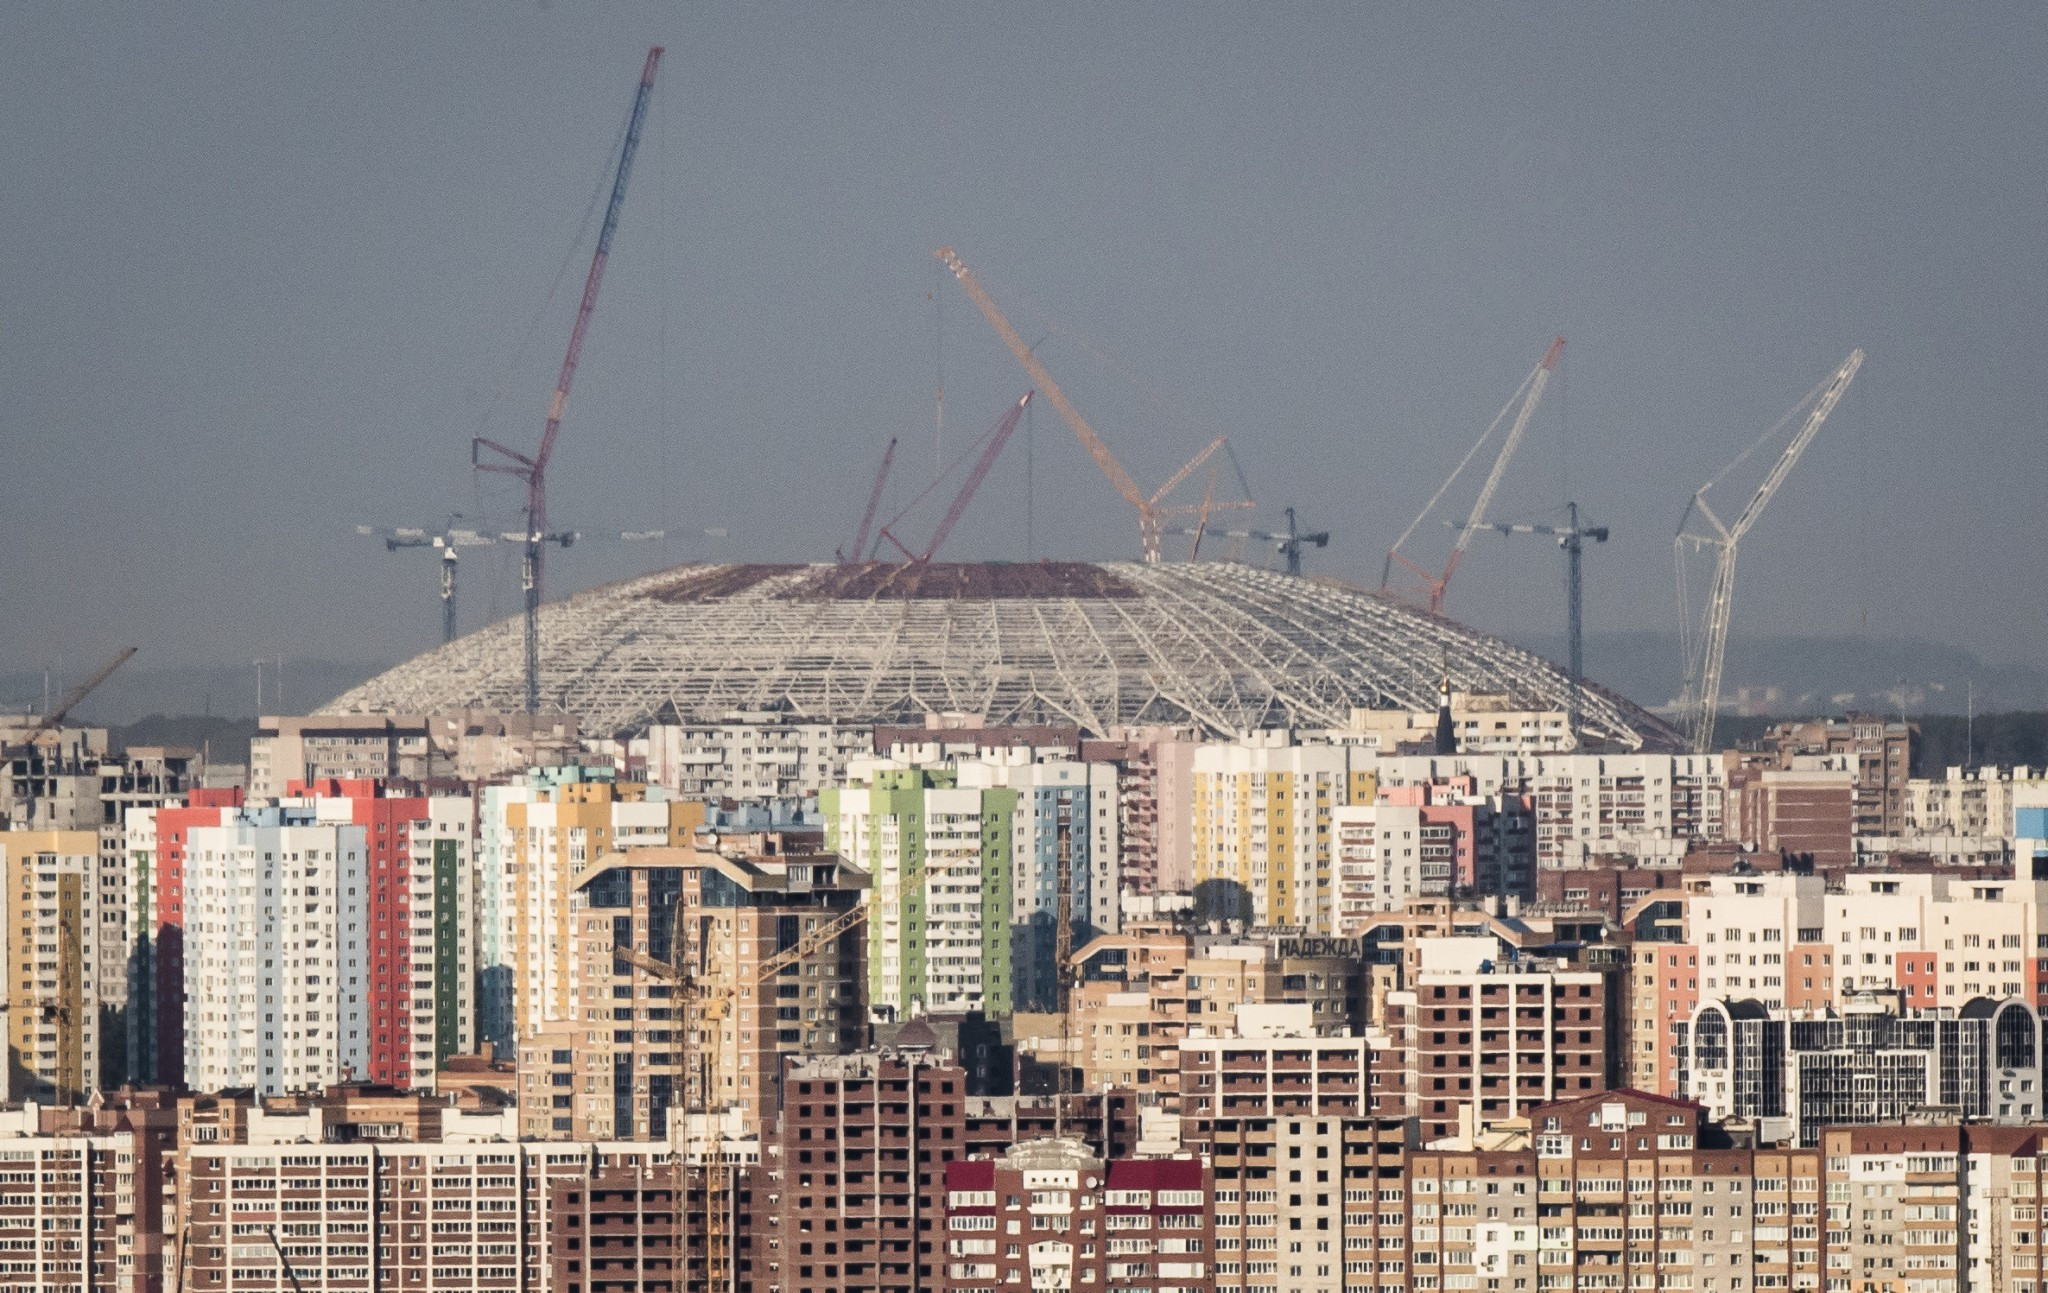 World Cup Stadium in Samara hit by further delays as contractors confirm work 30 days behind schedule